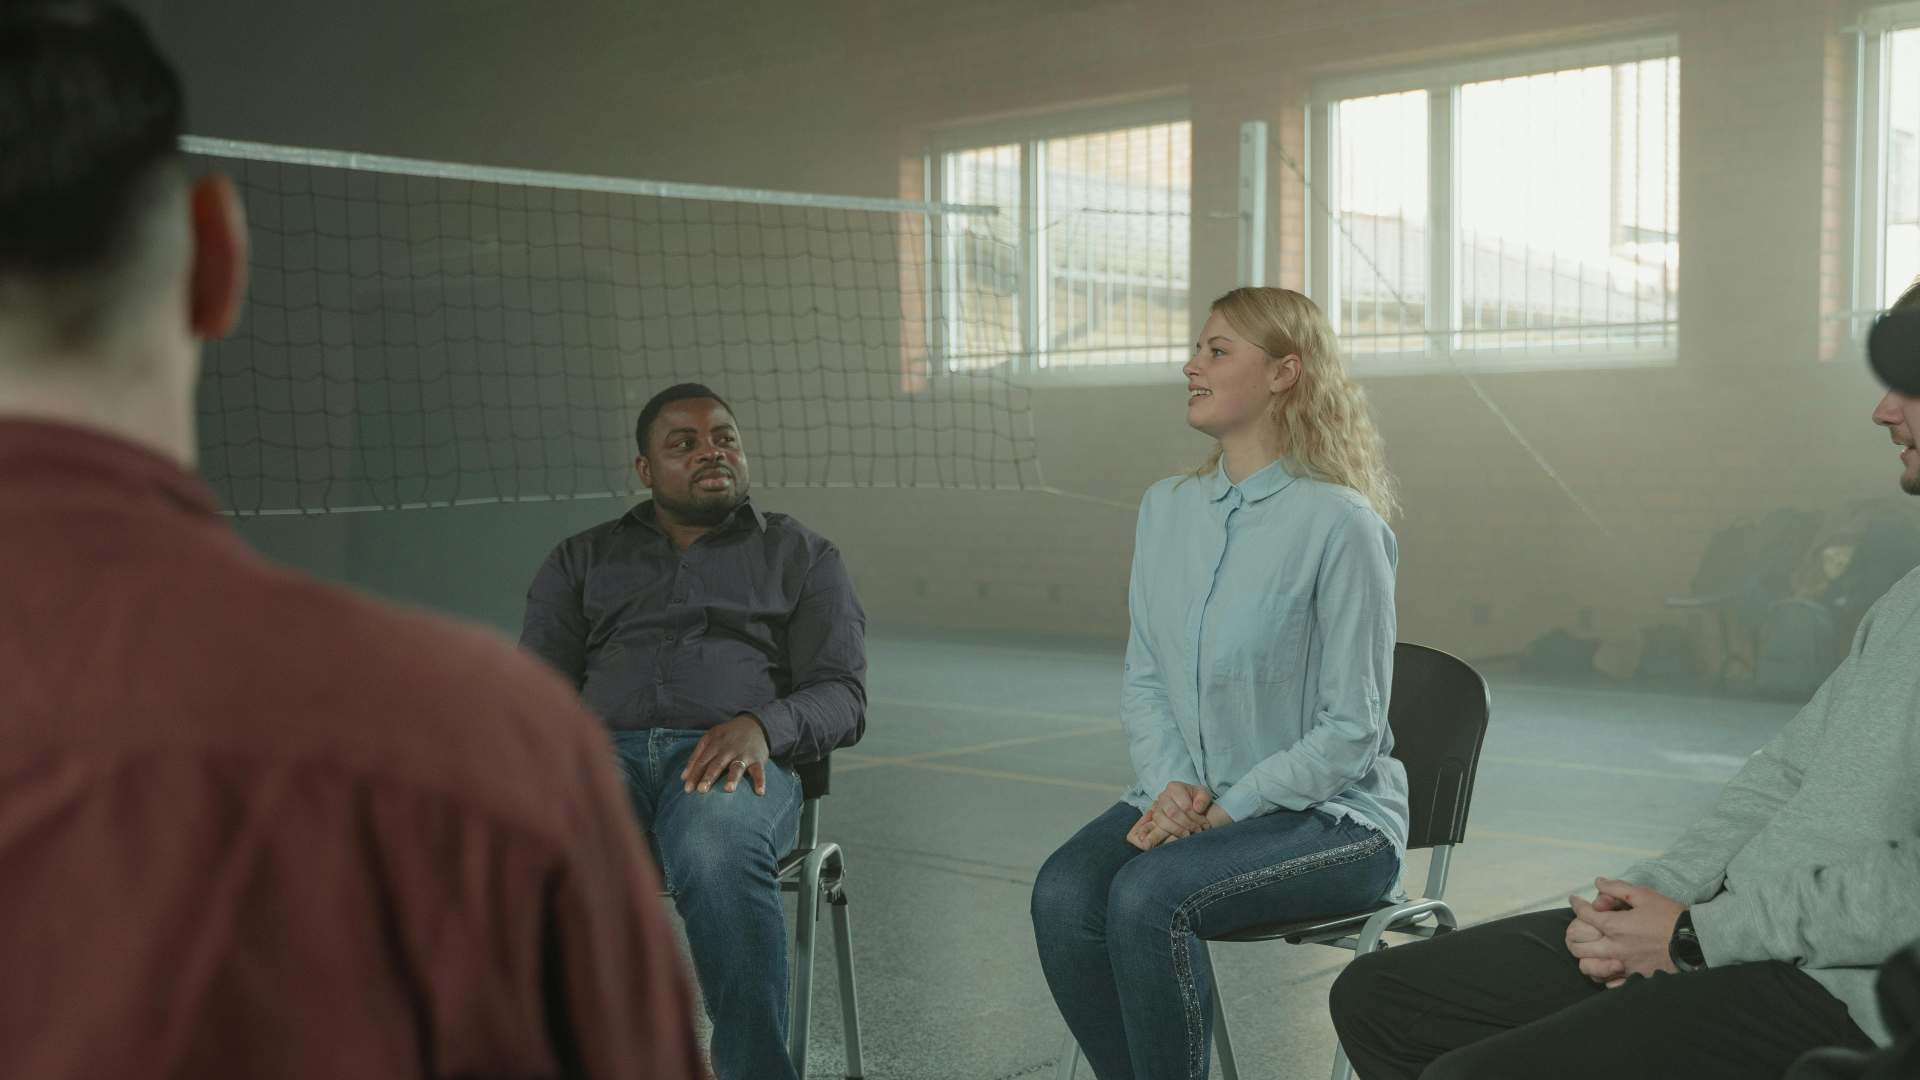 dark skinned man listens attentively to young blond woman sharing in a circle meeting